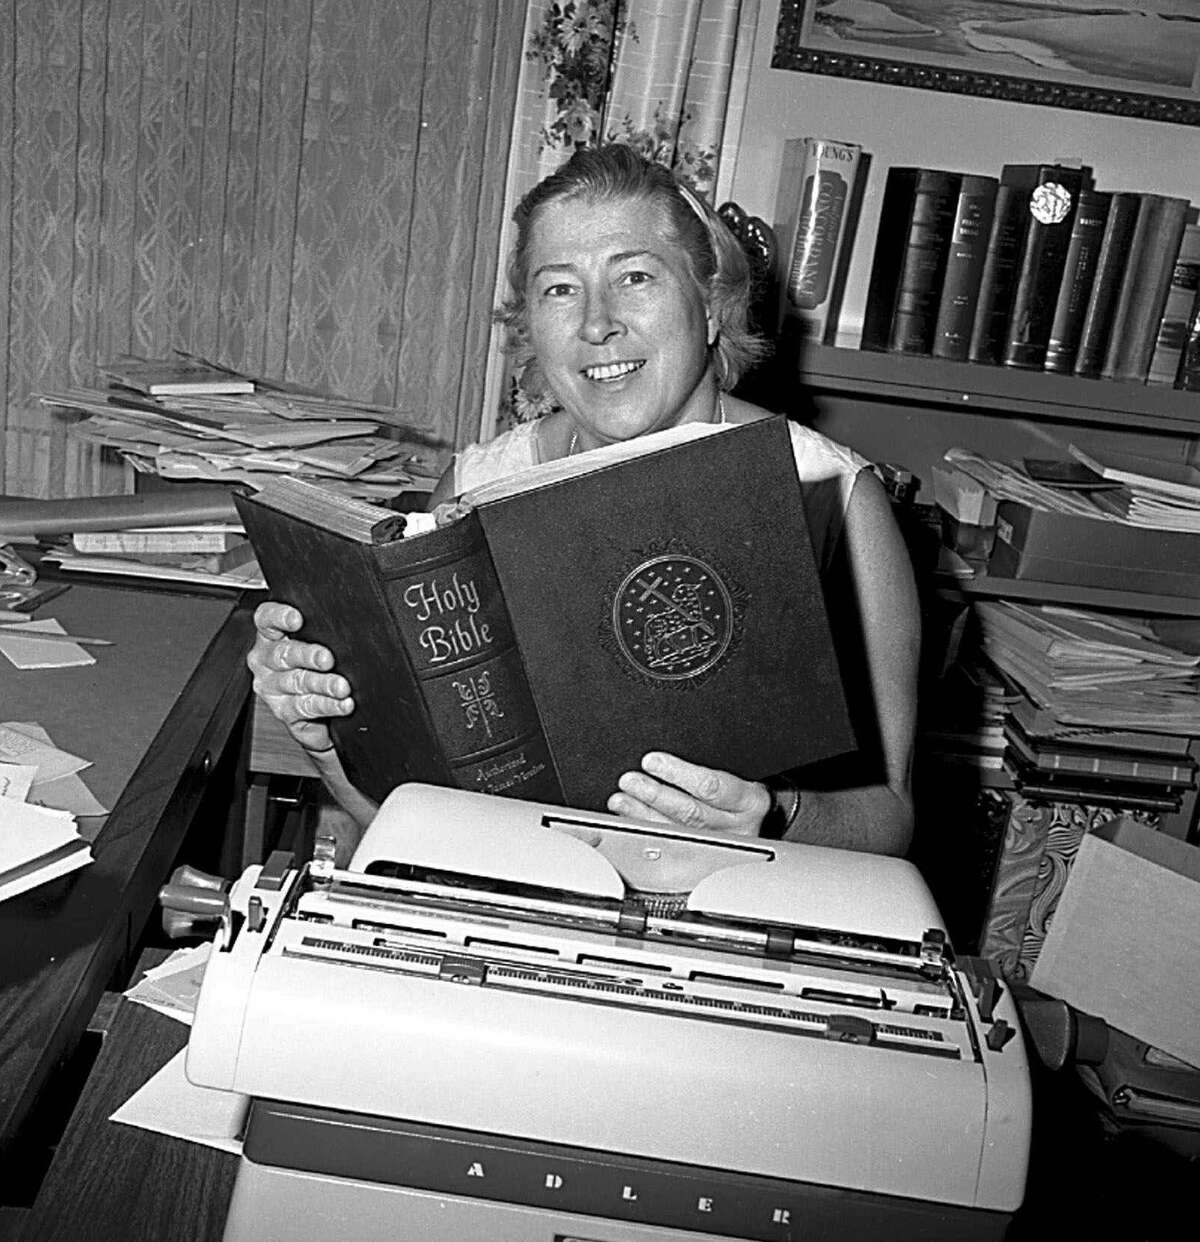 The real atheist leader Madalyn Murray O'Hair. She holds a copy of the Bible in her office in this Dec. 3, 1969 file photo.